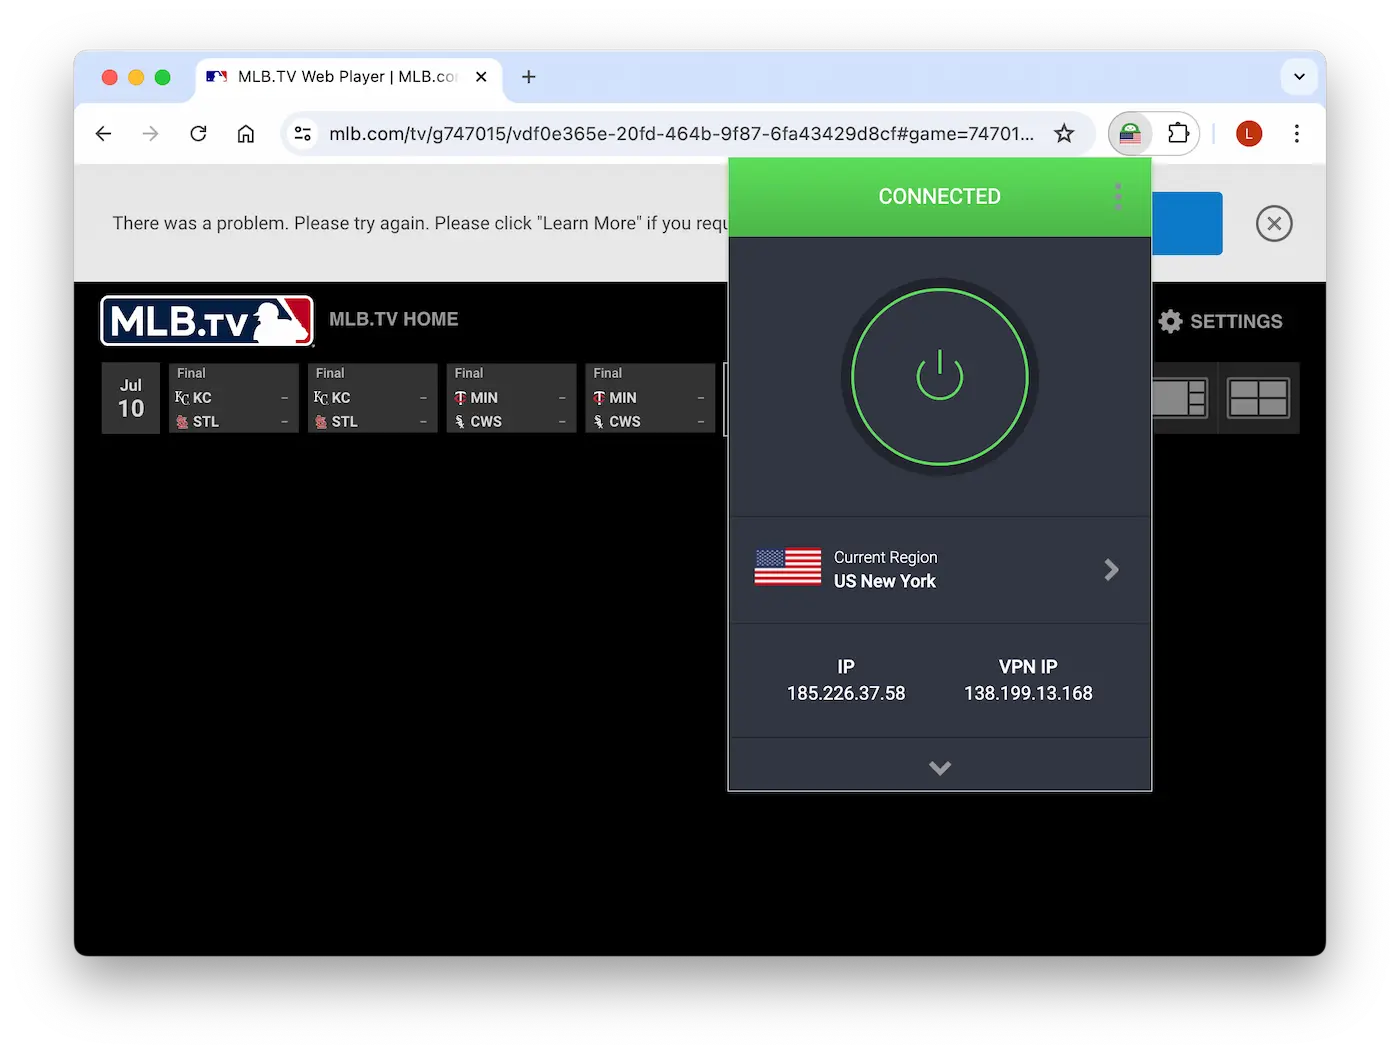 Error message being shown when trying to access MLB.TV while connected to a PIA VPN server.